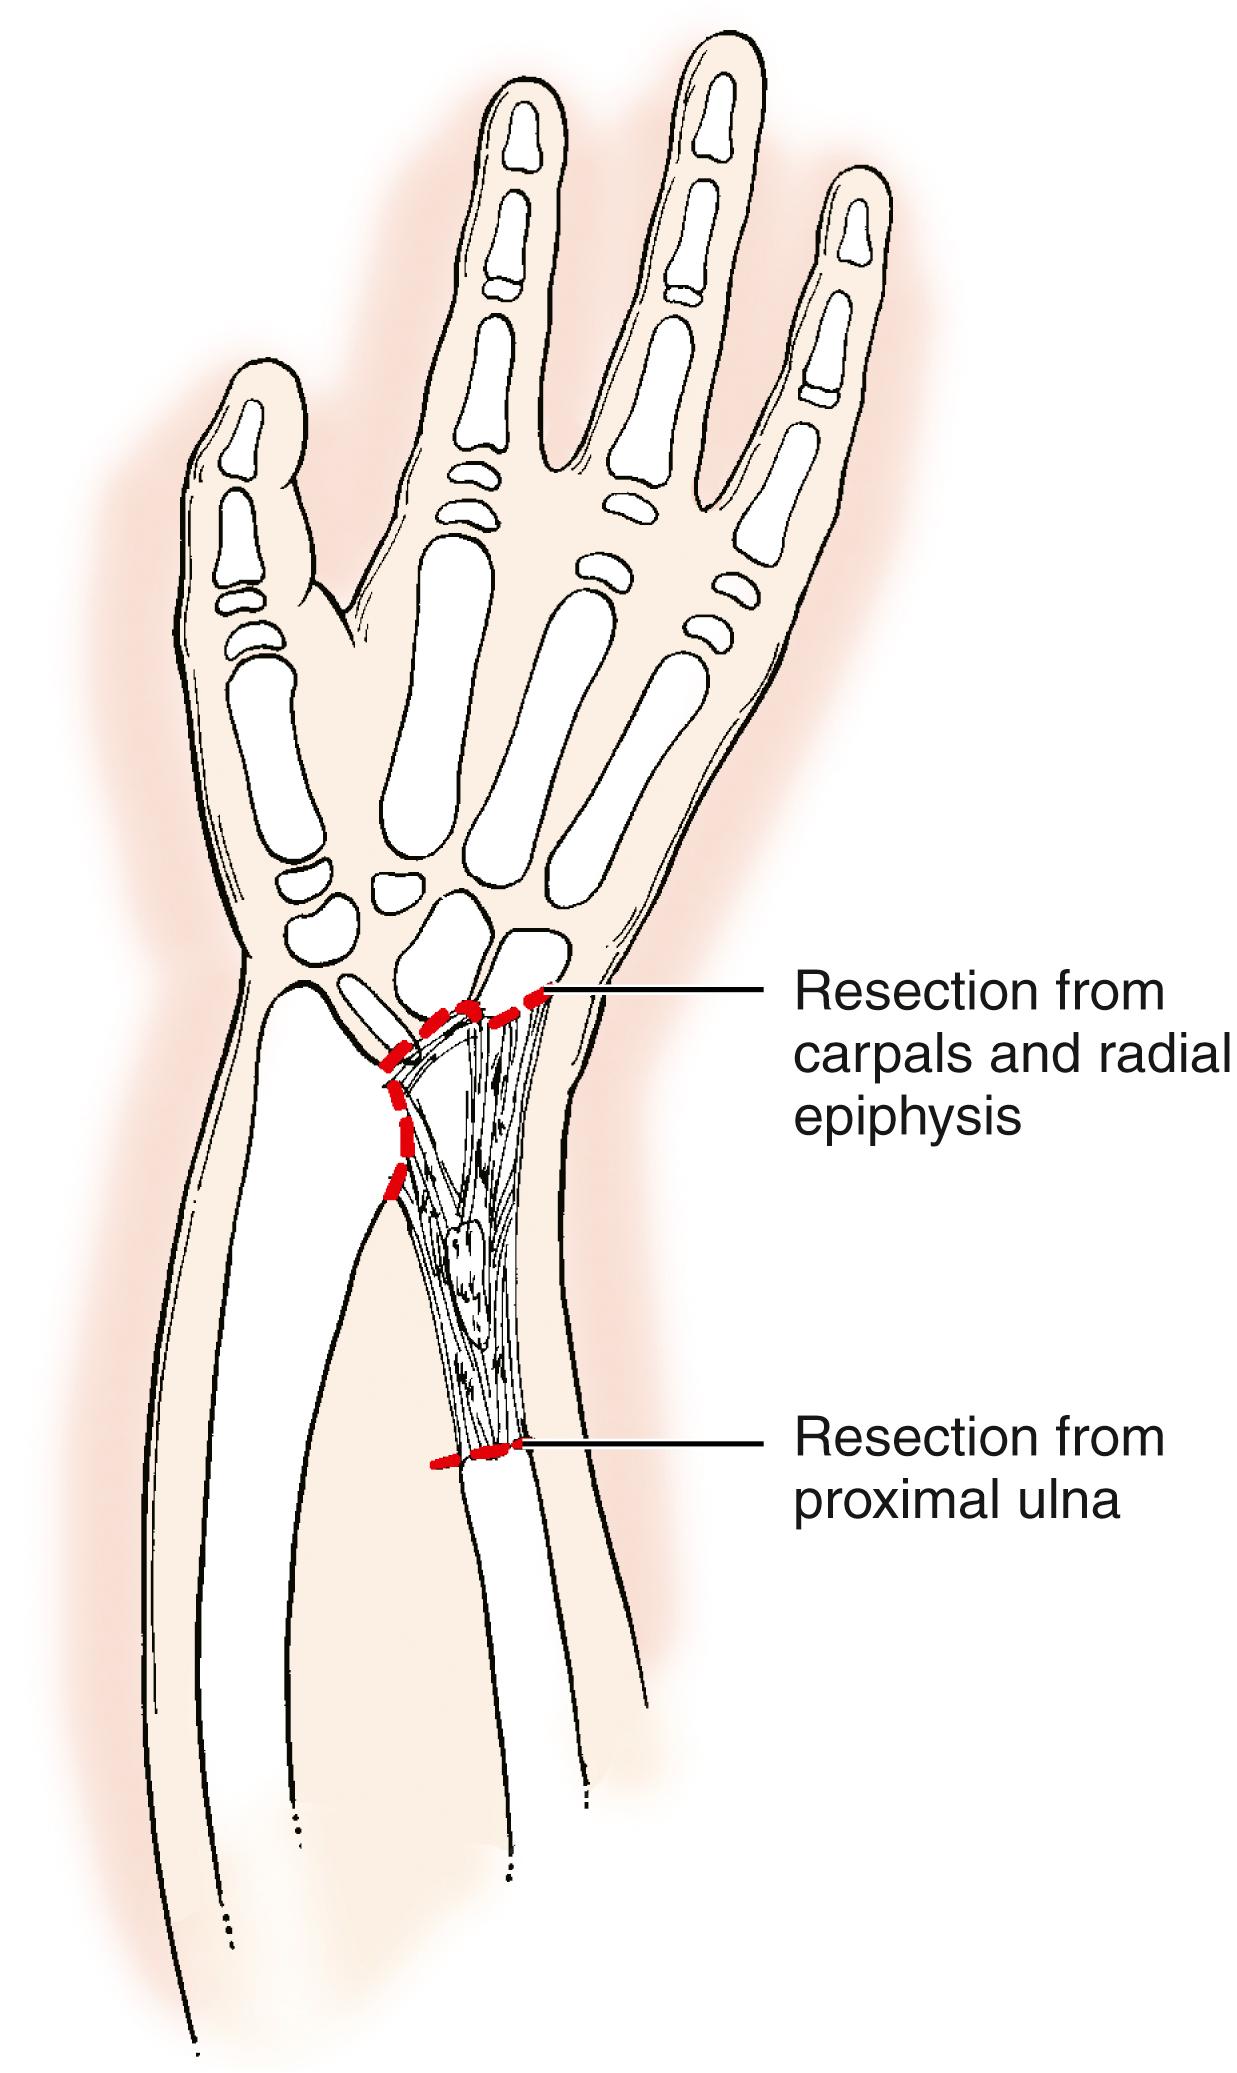 Fig. 38.16, Excision of the ulnar anlage. This may prevent further ulnar deviation of the hand.